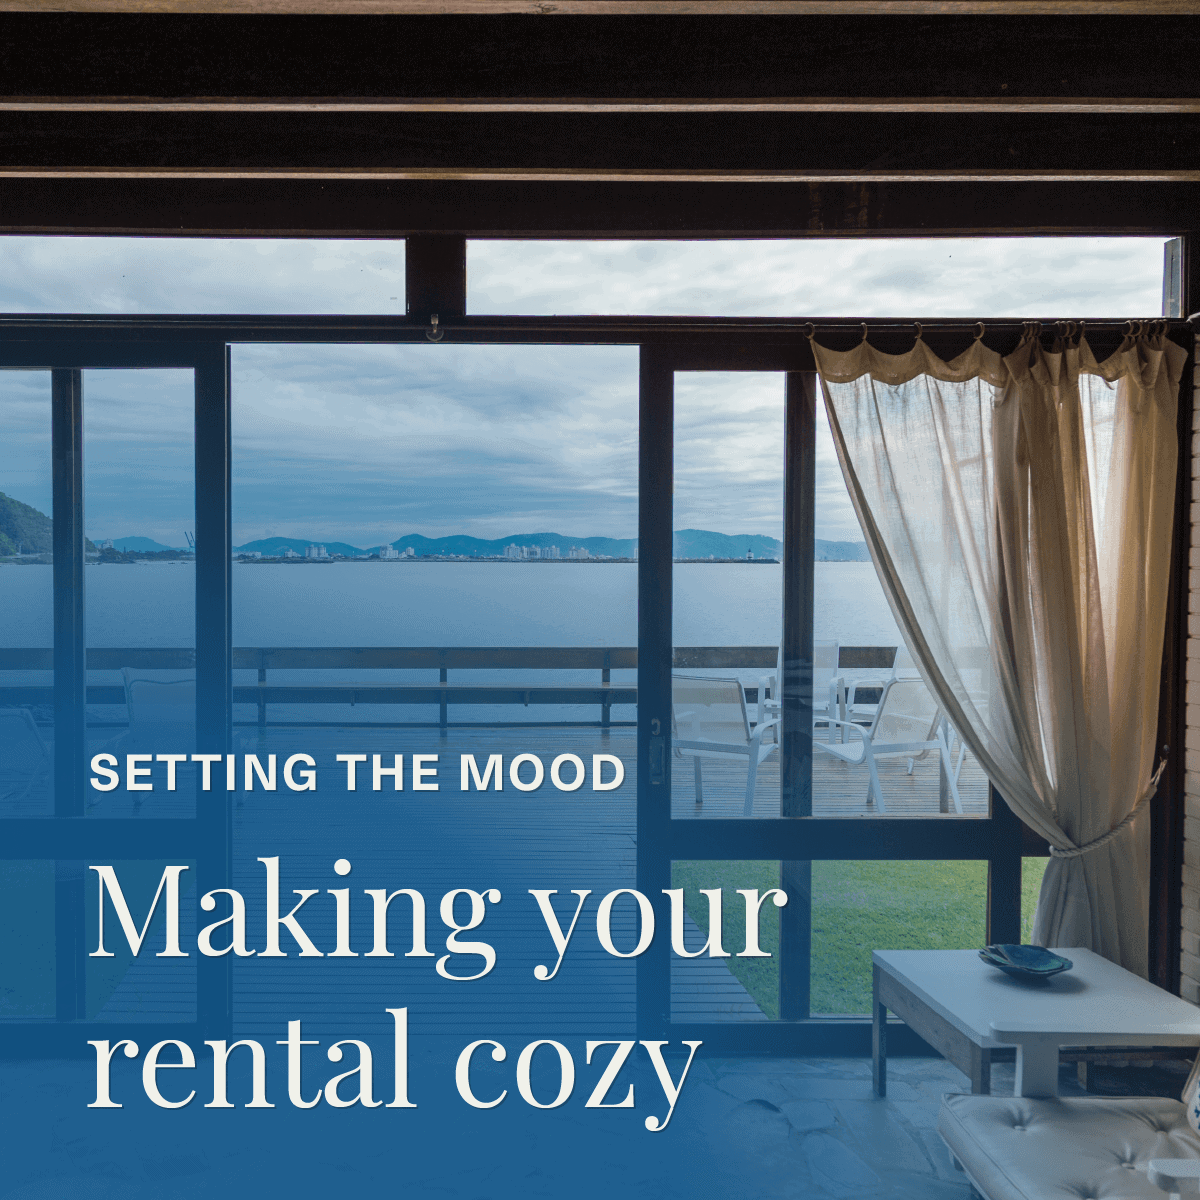 Making your rental cozy